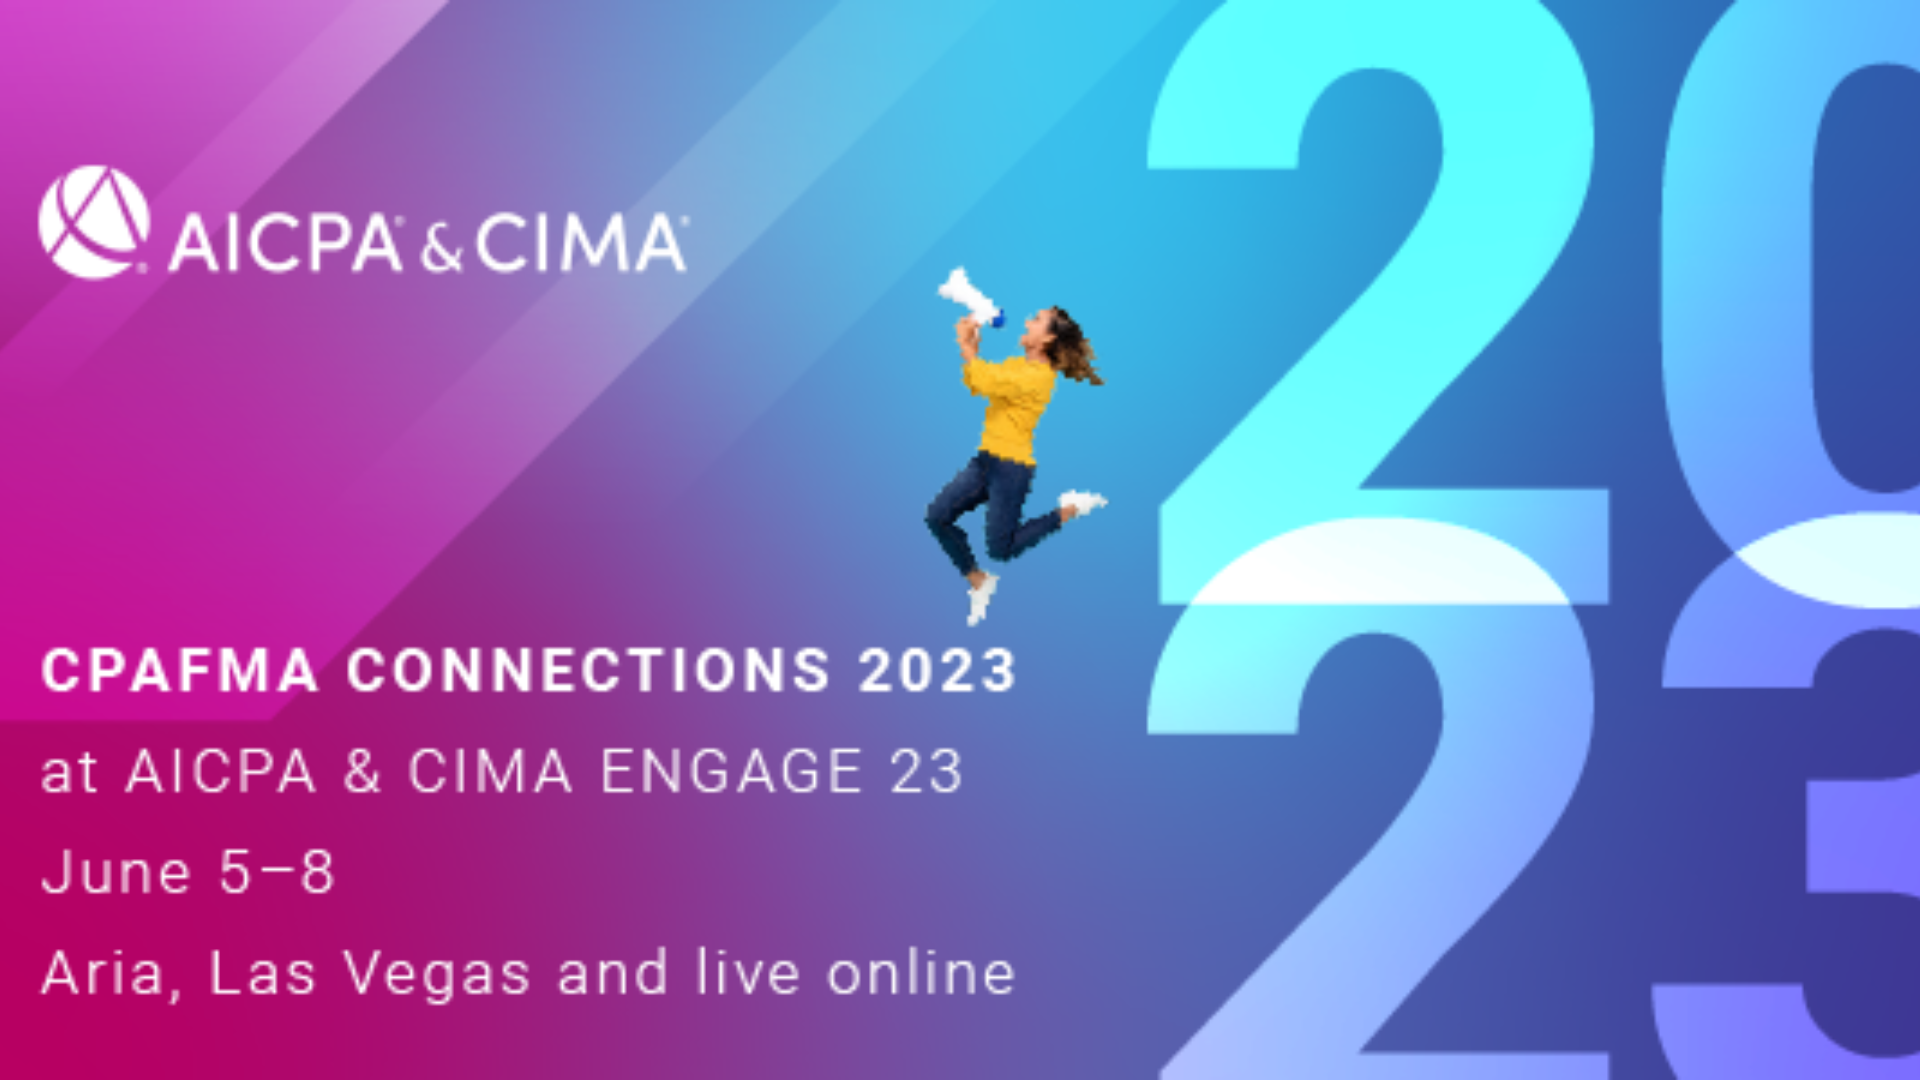 CPAFMA CONNECTIONS 2023 at AICPA & CIMA ENGAGE 23